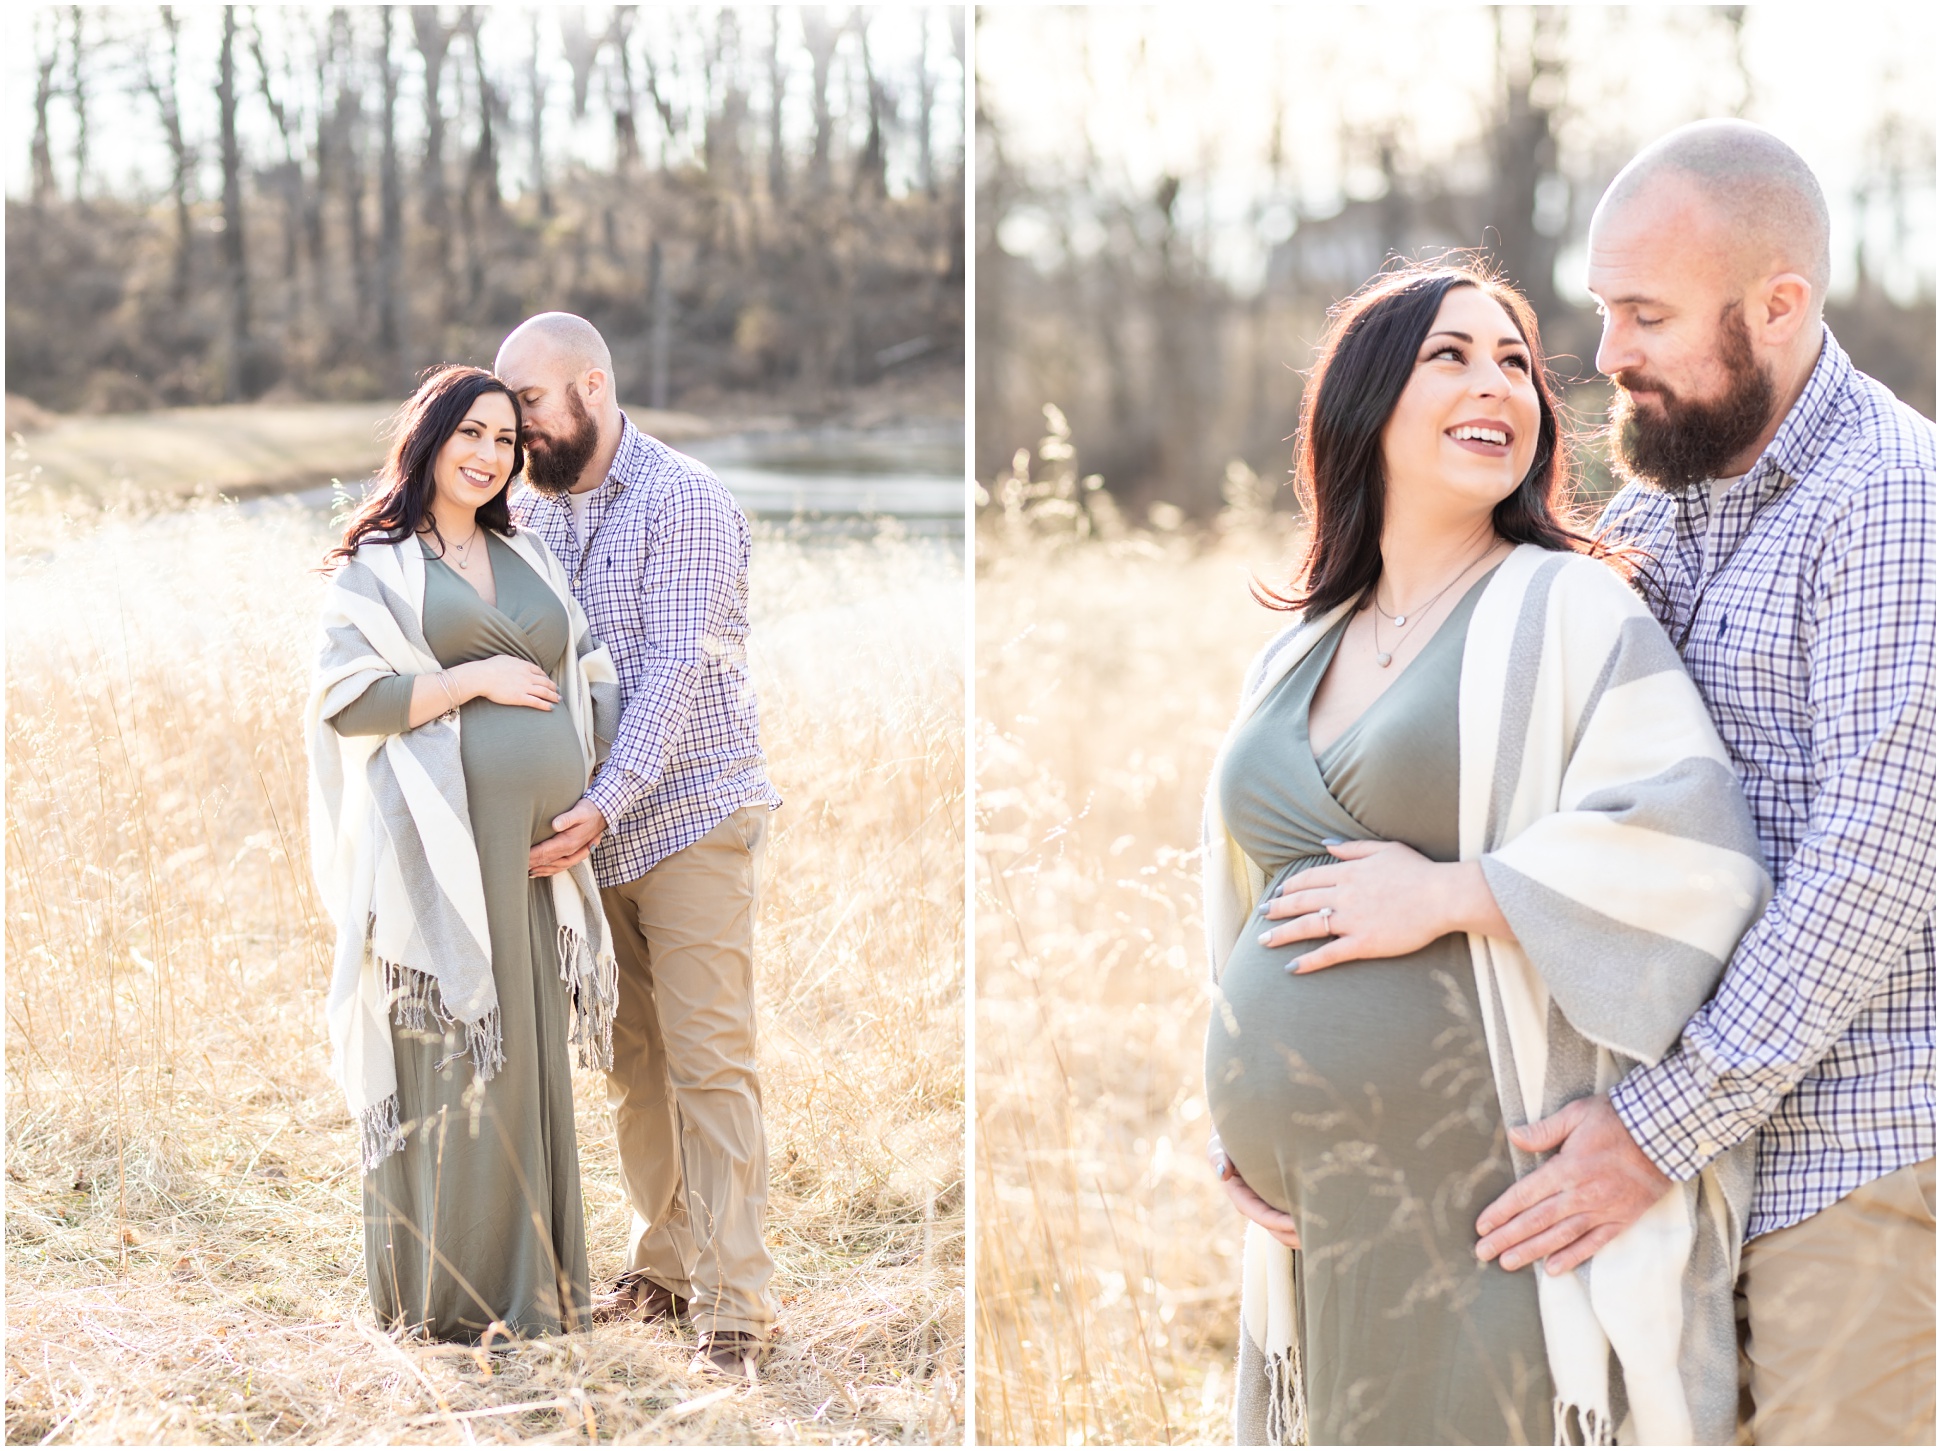 Two images of maternity session. Dad is wearing kahkis and a button down shirt, mom is wearing green maternity dress and a shawl